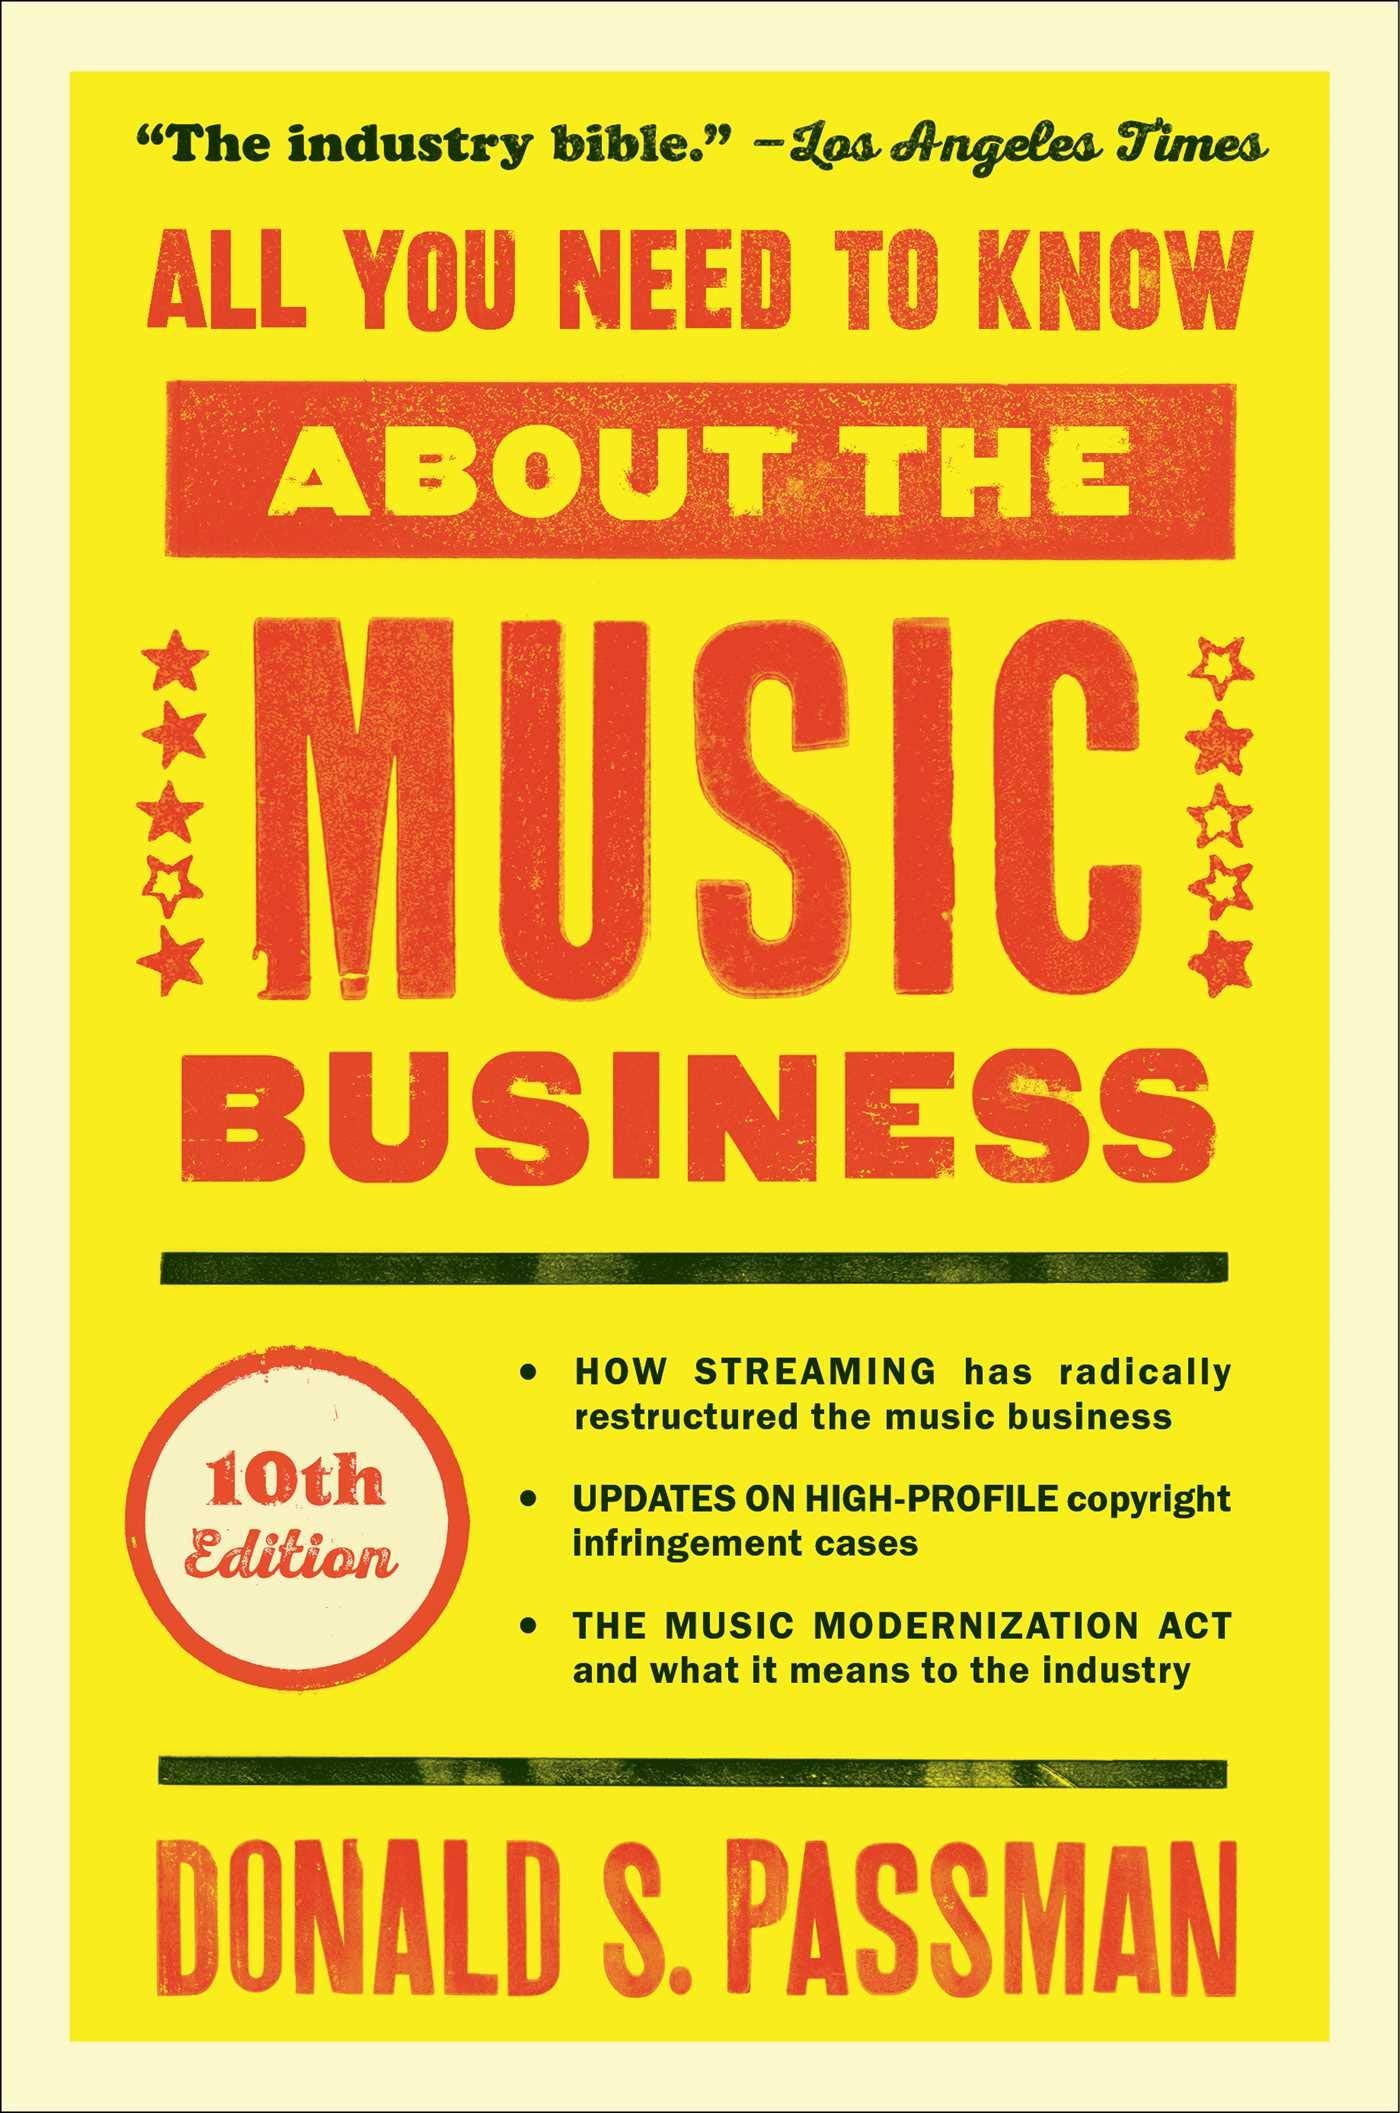 All You Need to Know about the Music Business // 10th Edition